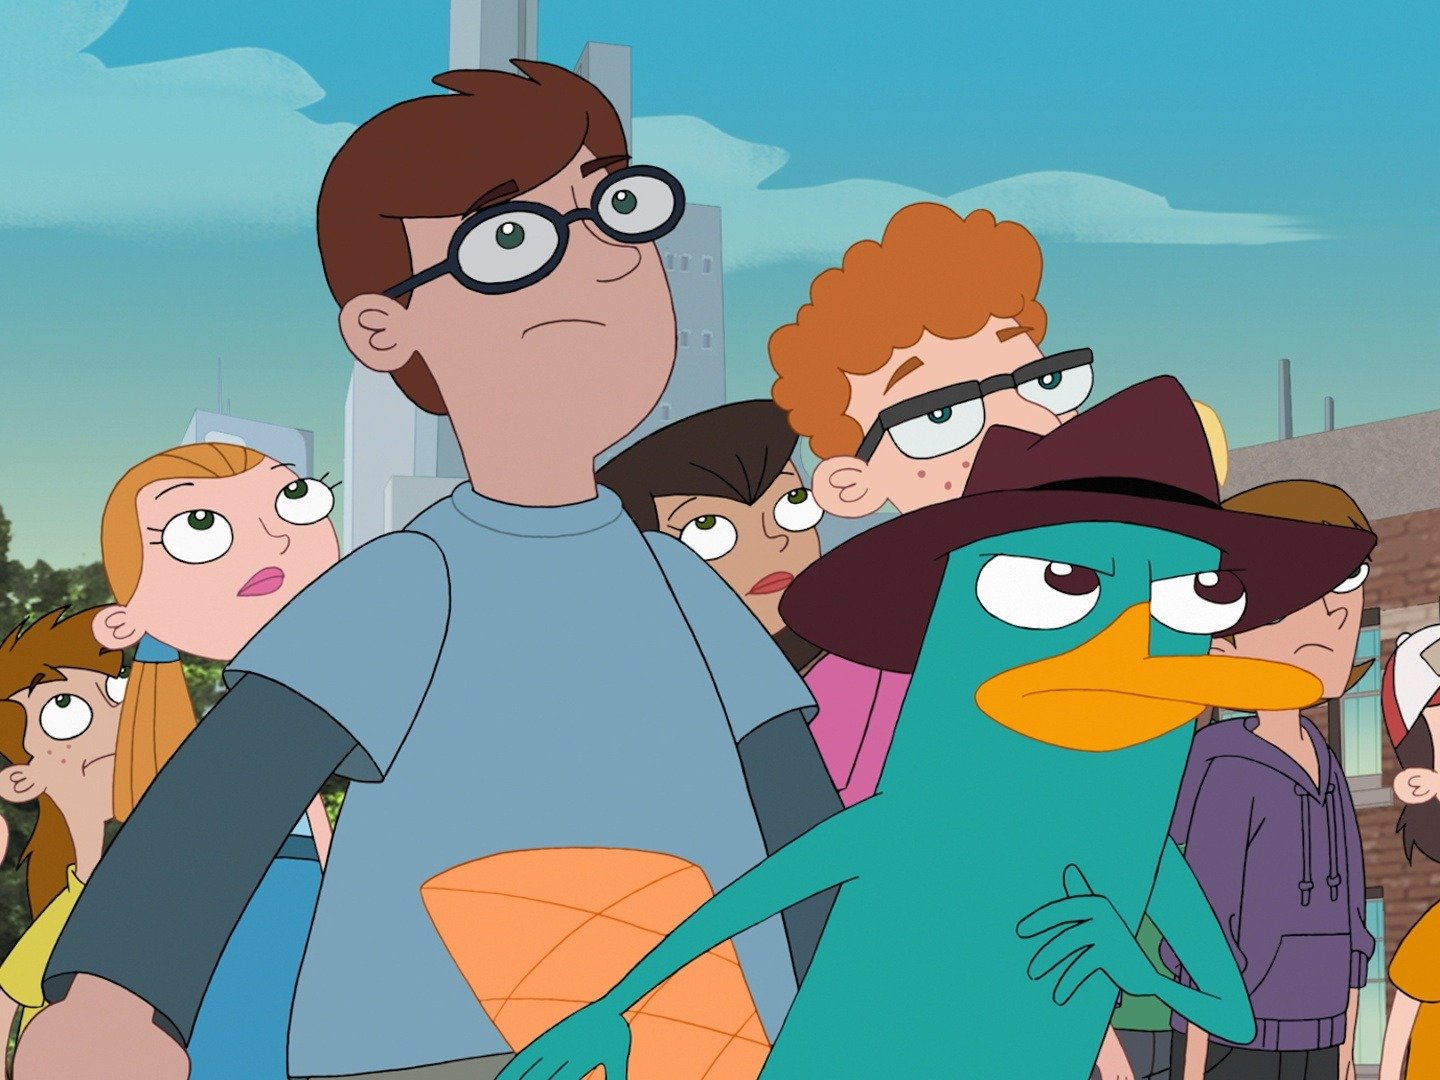 phineas and ferb cast